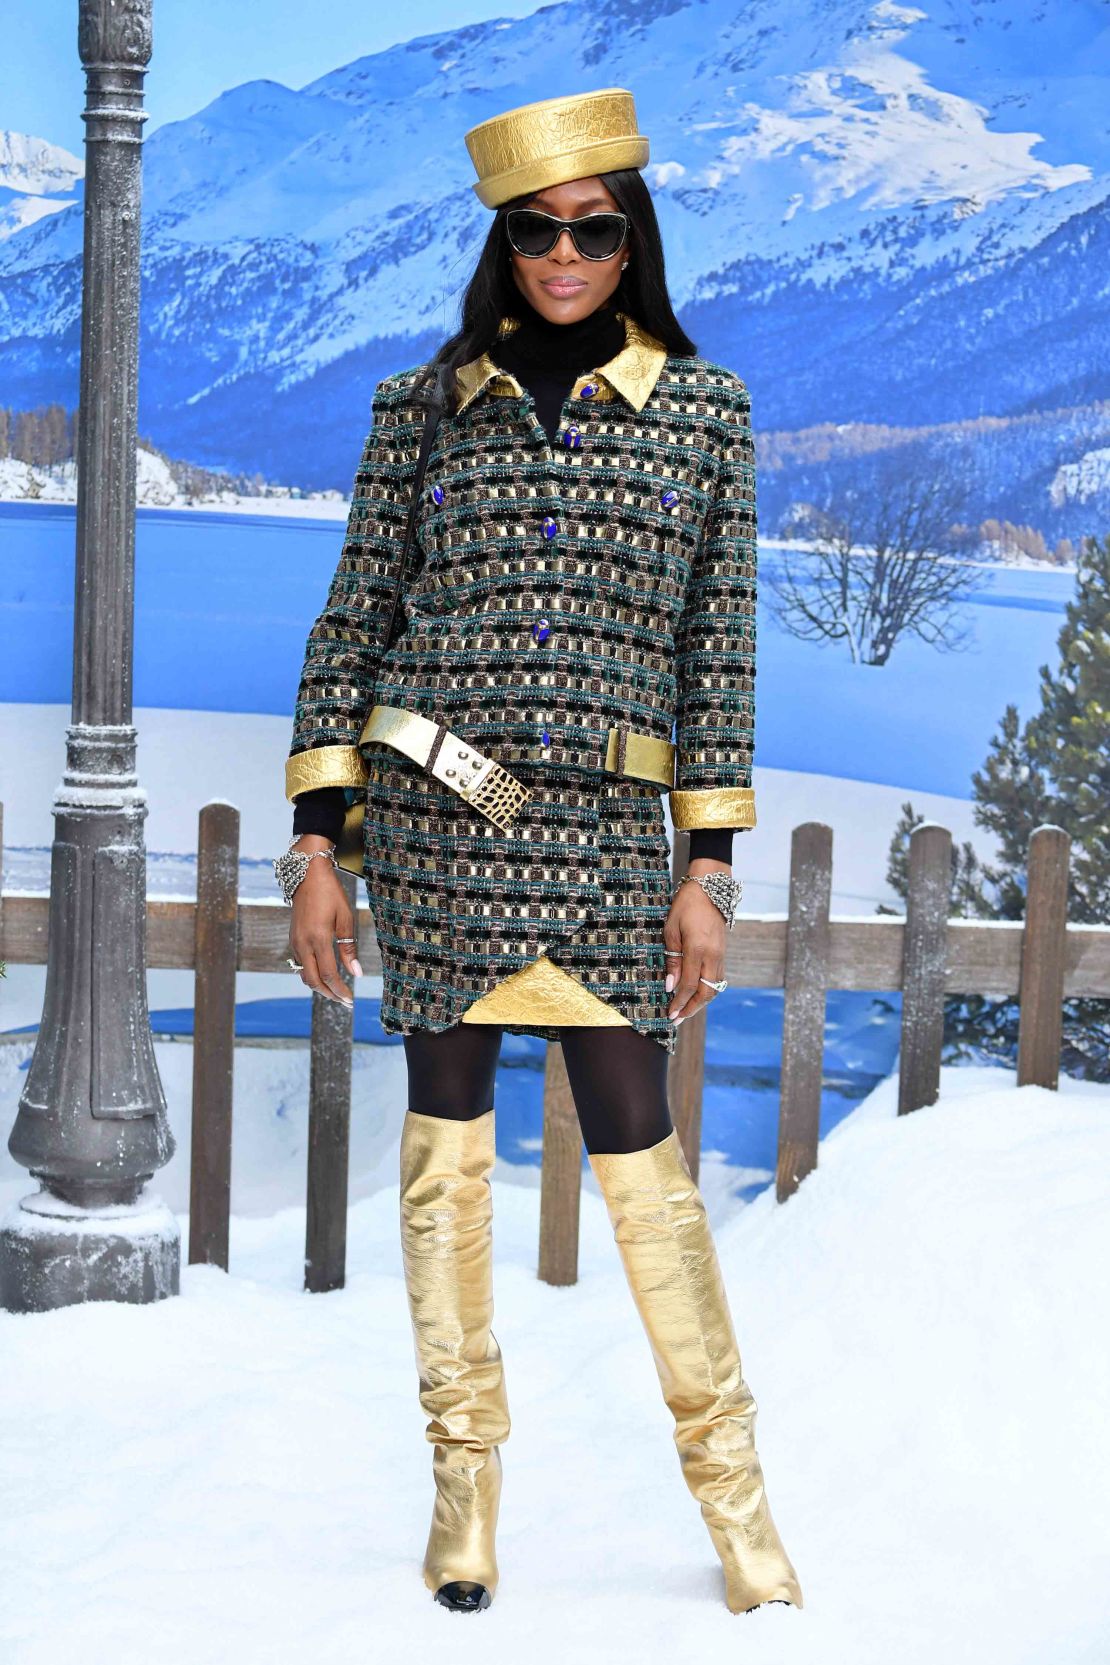 Lookbook: WO Chanel Resort Cruise Collection 23/24